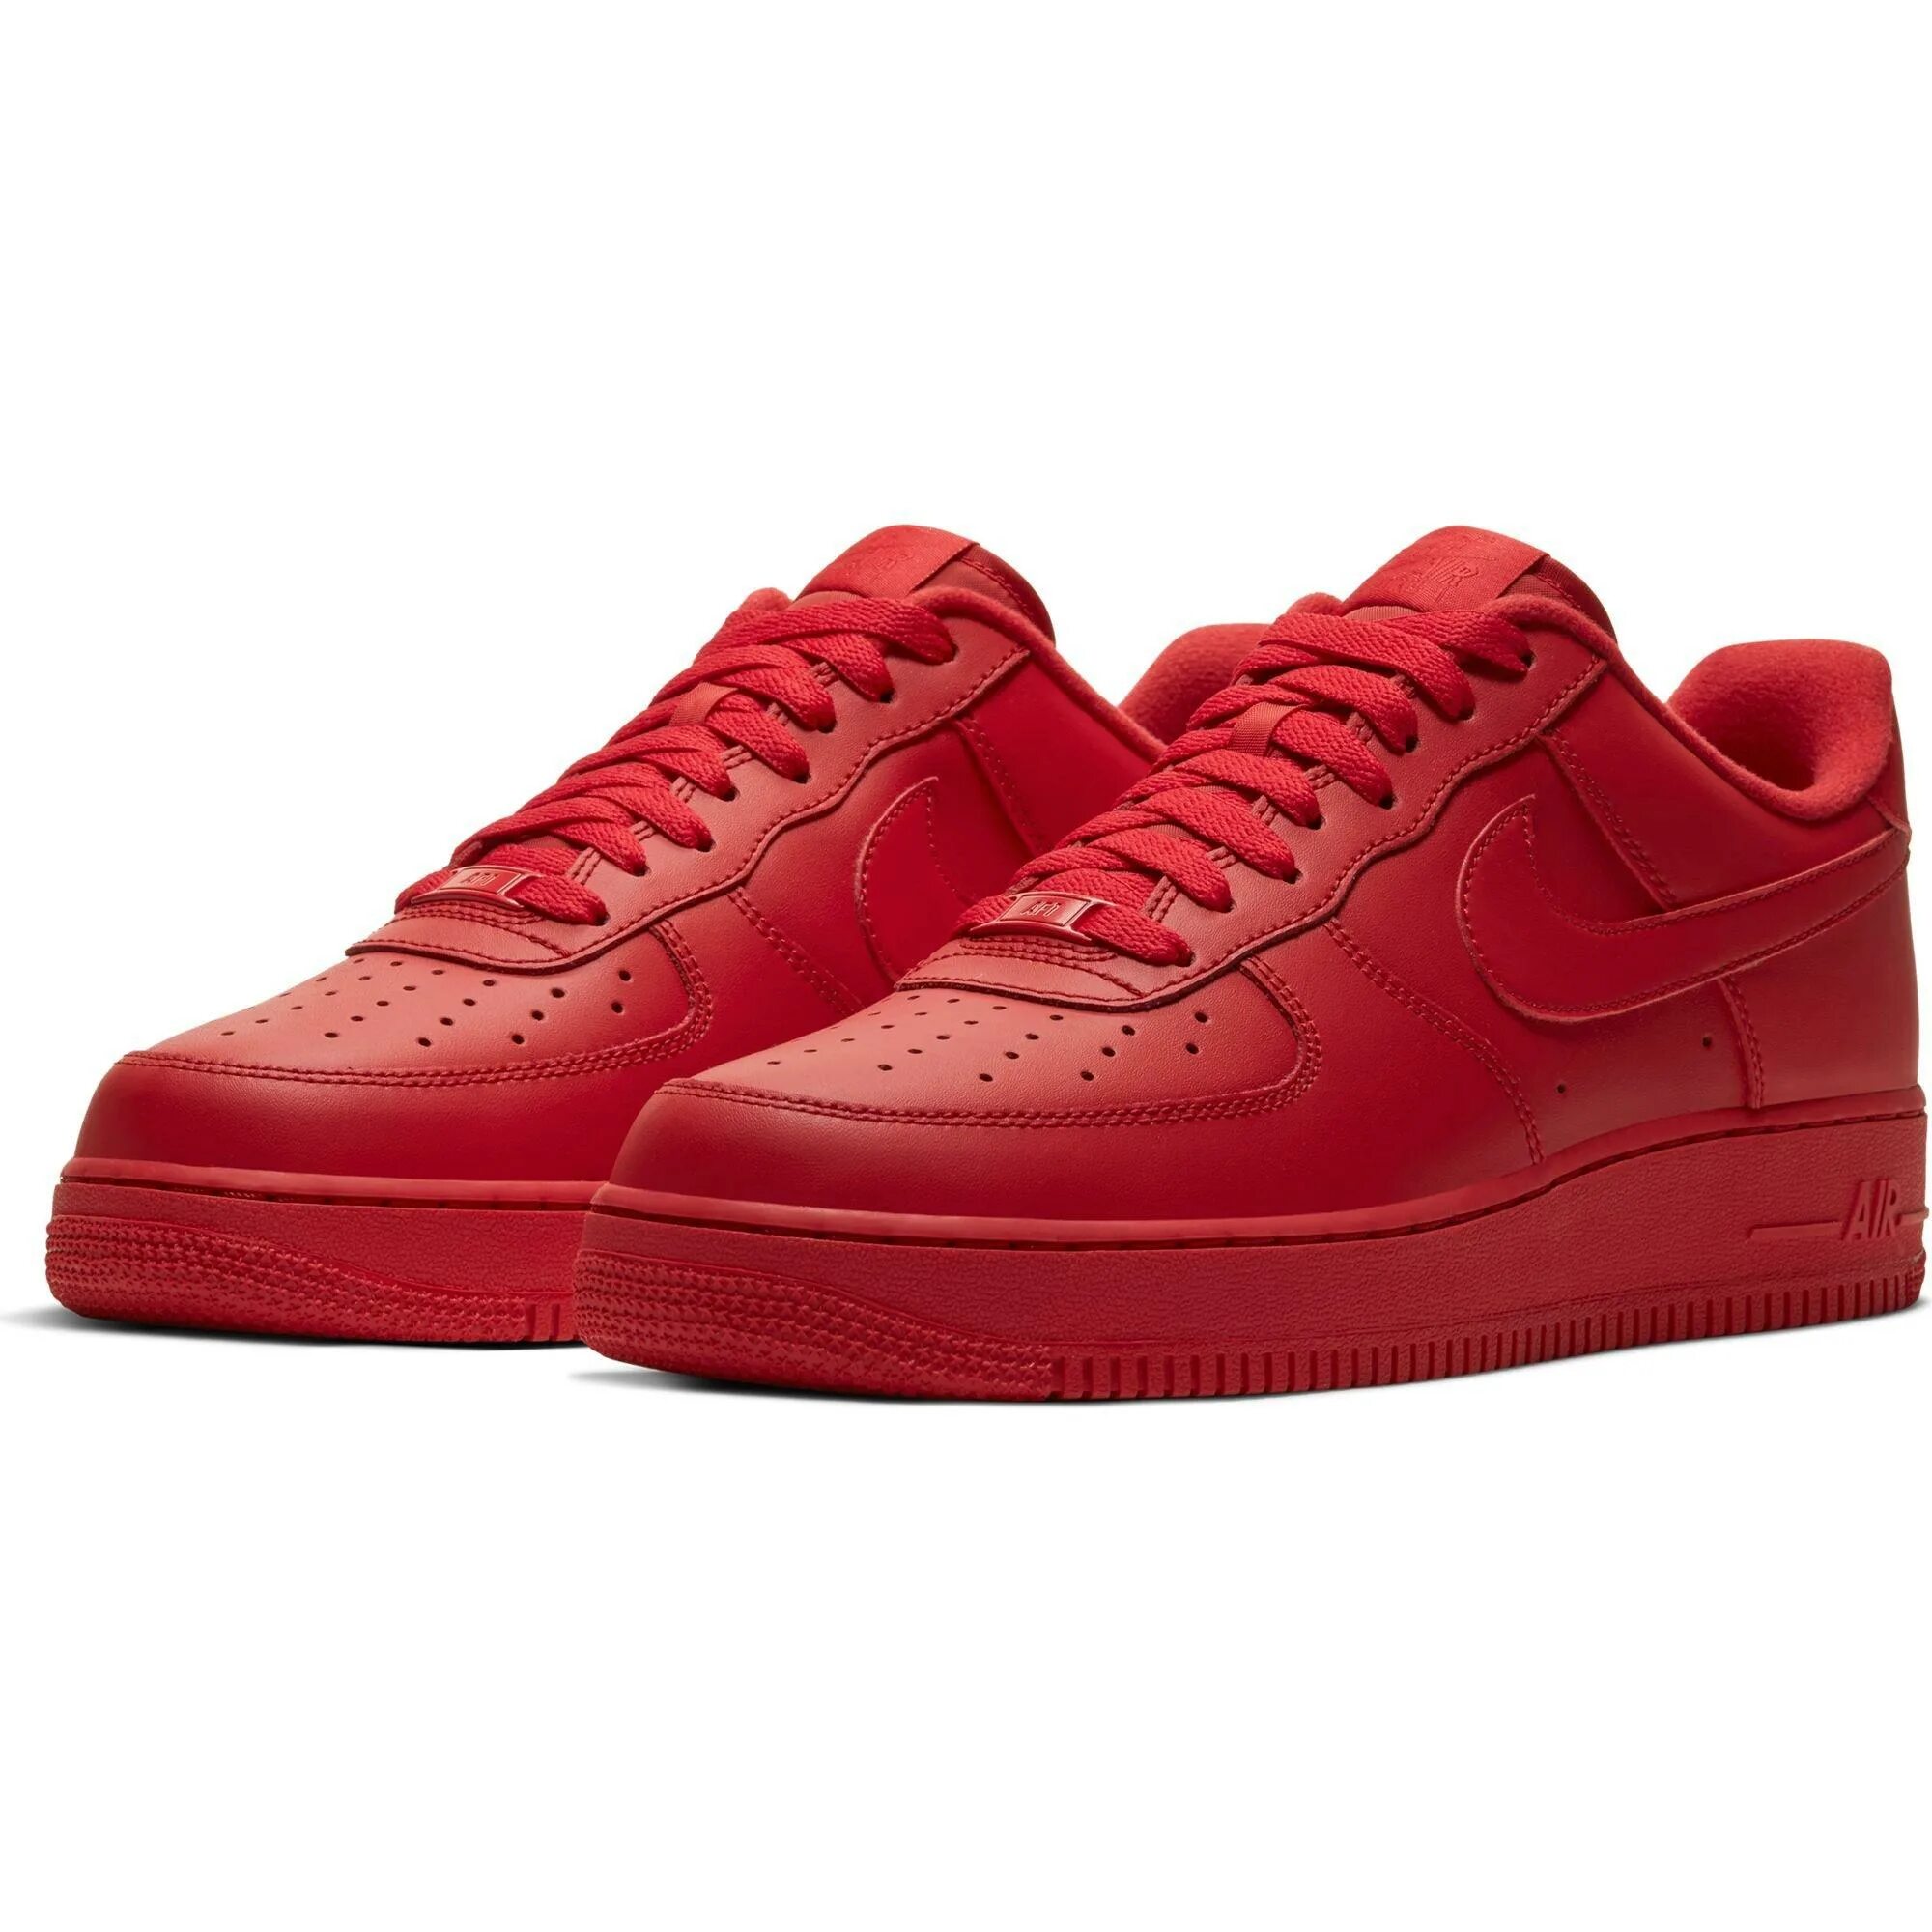 Кроссовки nike air force 1 07 lv8. Nike Air Force 1 Red. Nike Air Force 1 Triple Red. Найк Форс 1 красные. Кроссовки Nike Air Force 1 Red.